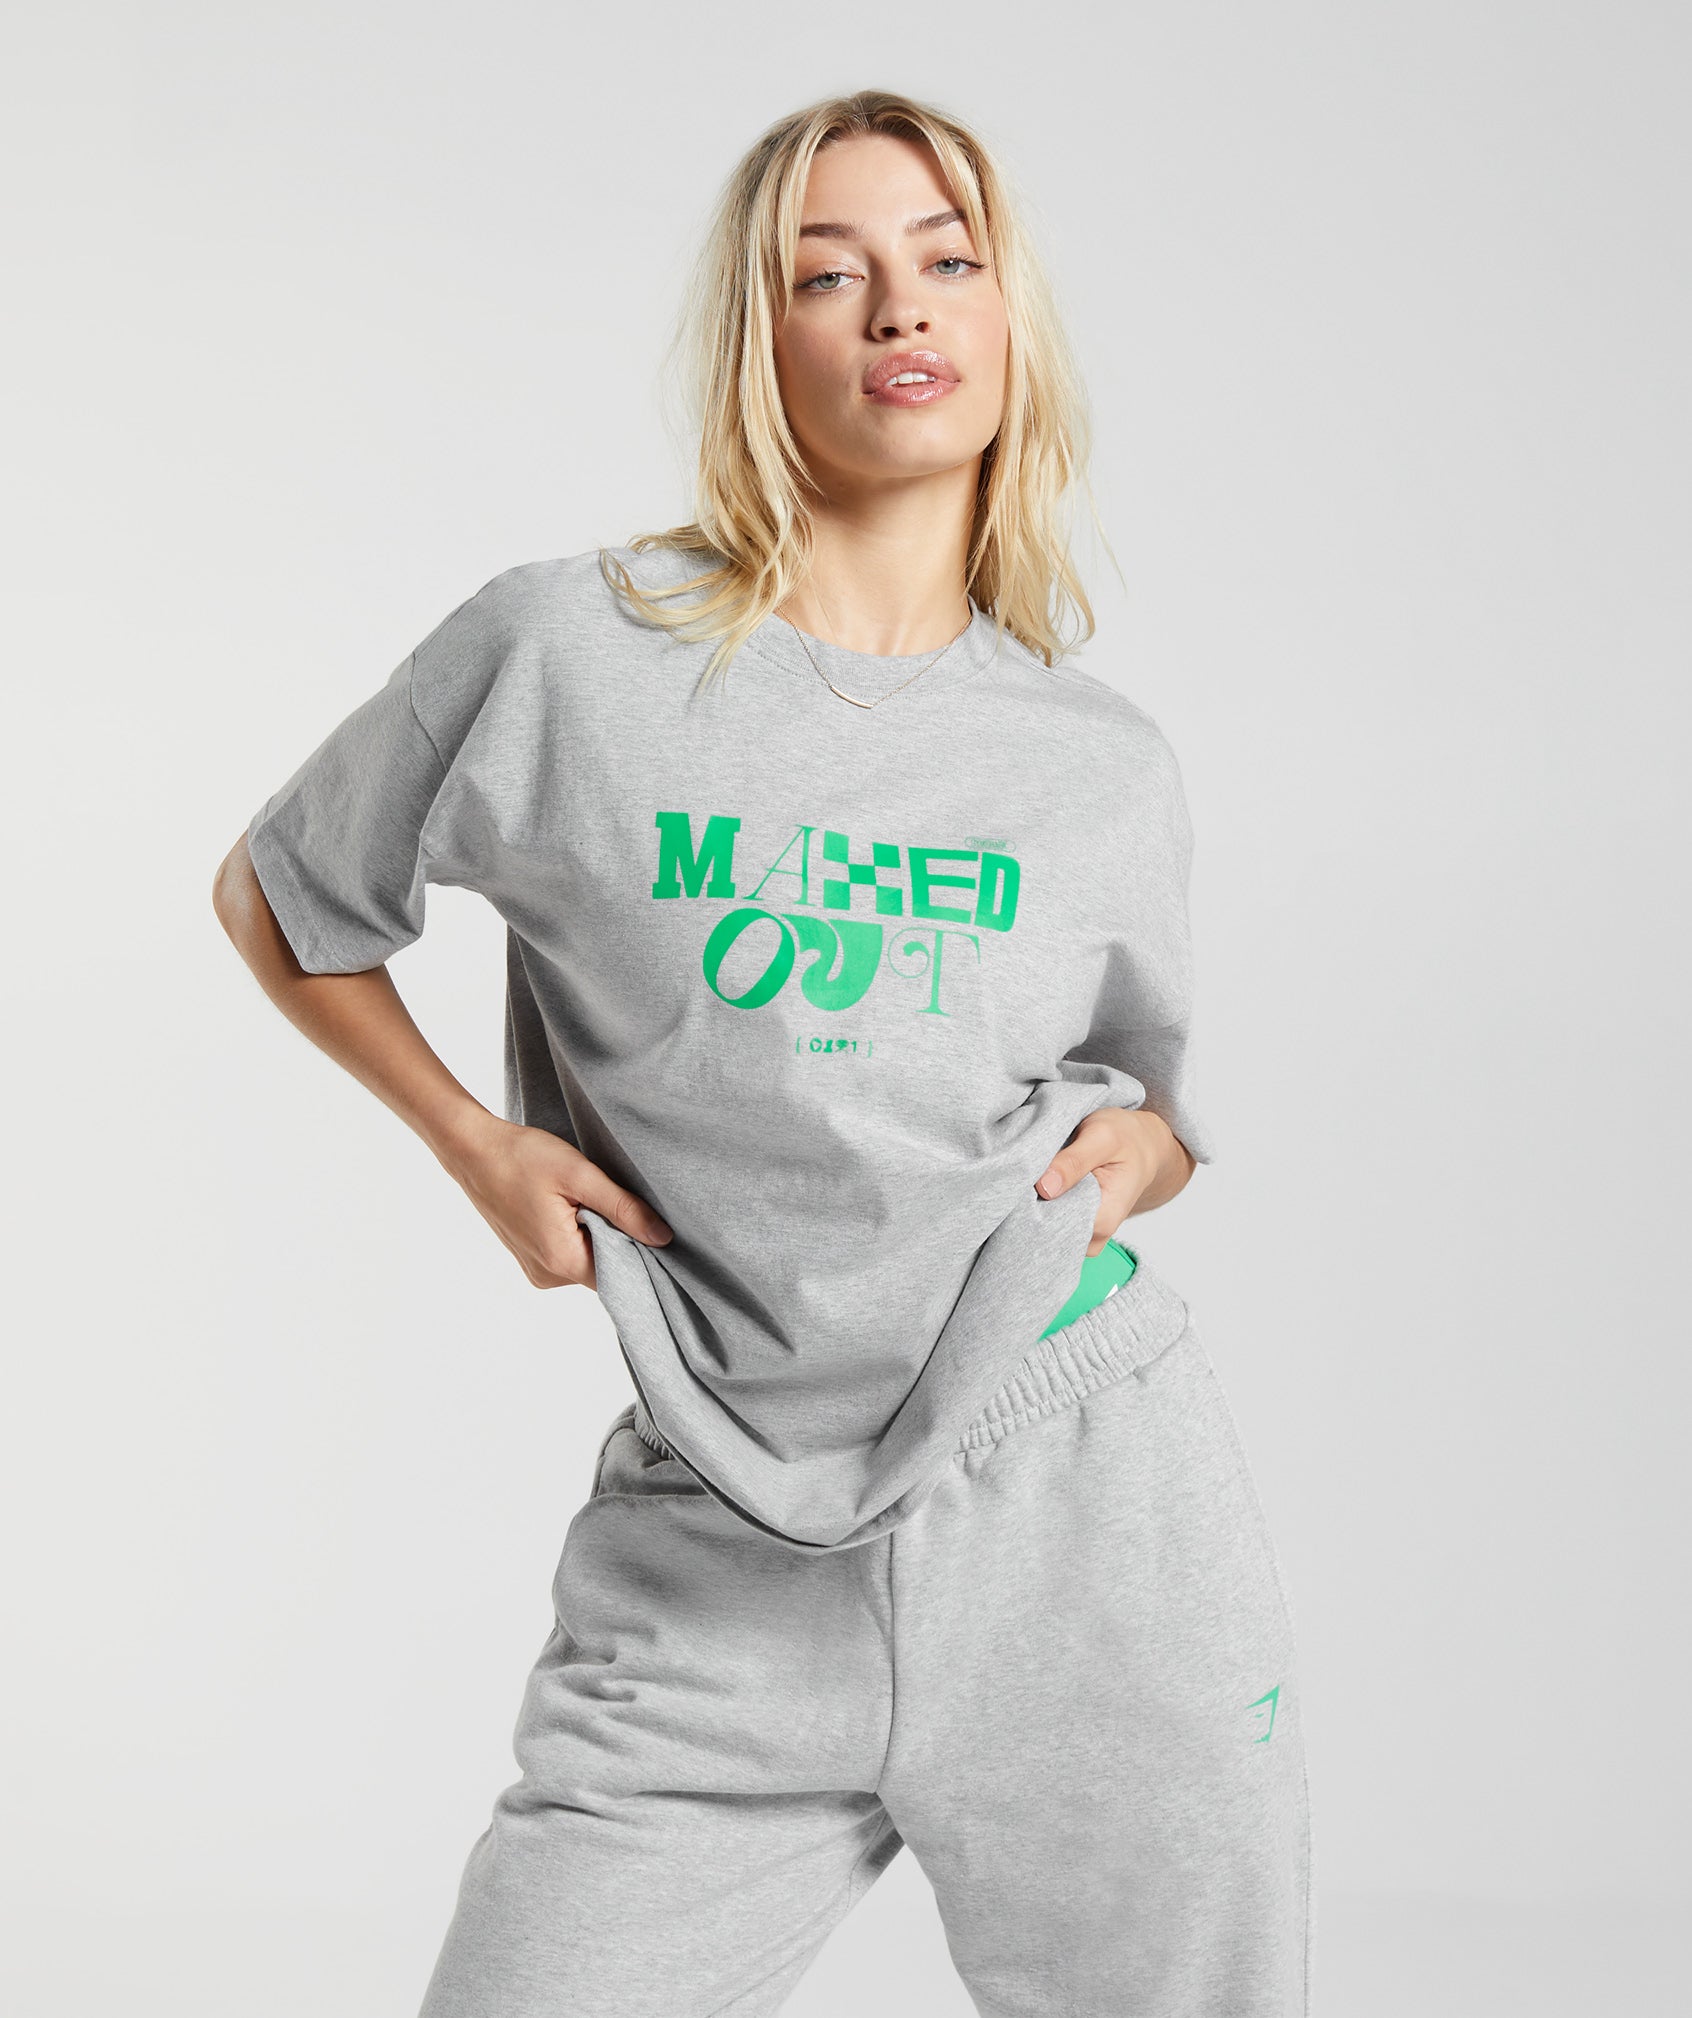 Maxed Out Oversized T-Shirt in Light Grey Marl - view 1